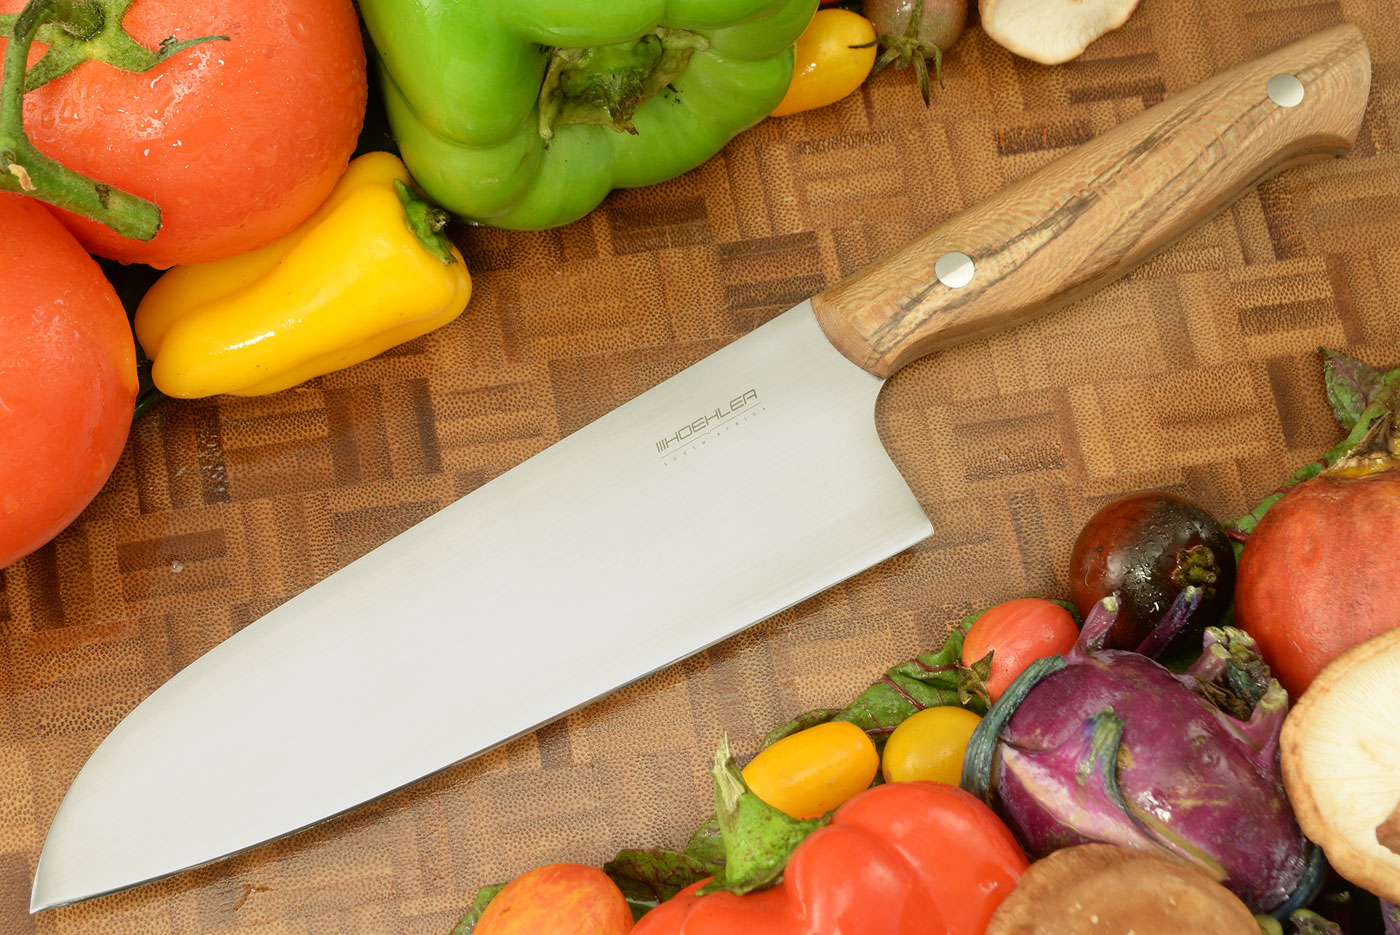 Chef's Knife - Santoku (6-3/4 in) with London Plane